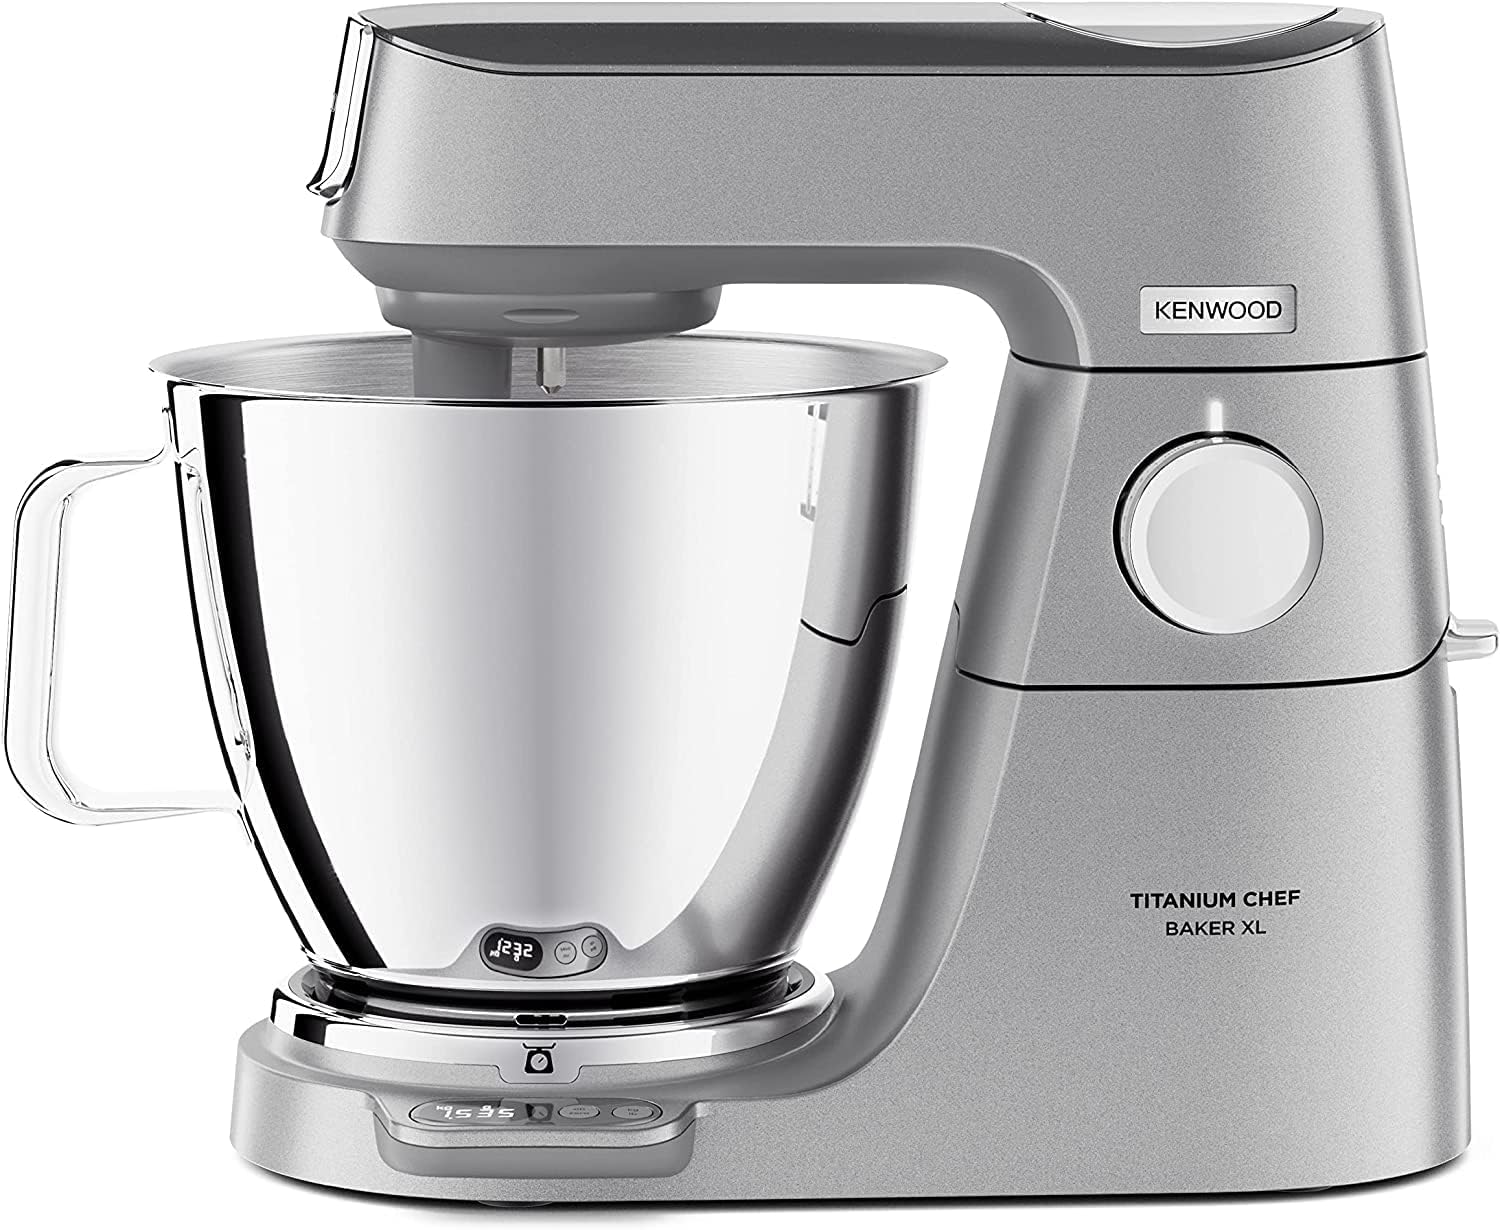 Kenwood Titanium Chef Baker XL KVL85.424SI - Food Processor with Integrated Scale & 2 Mixing Bowls, 1200 Watt, including 4 -Piece Patisserie Set, Glass Mixing Attachment & Chopper, Silver